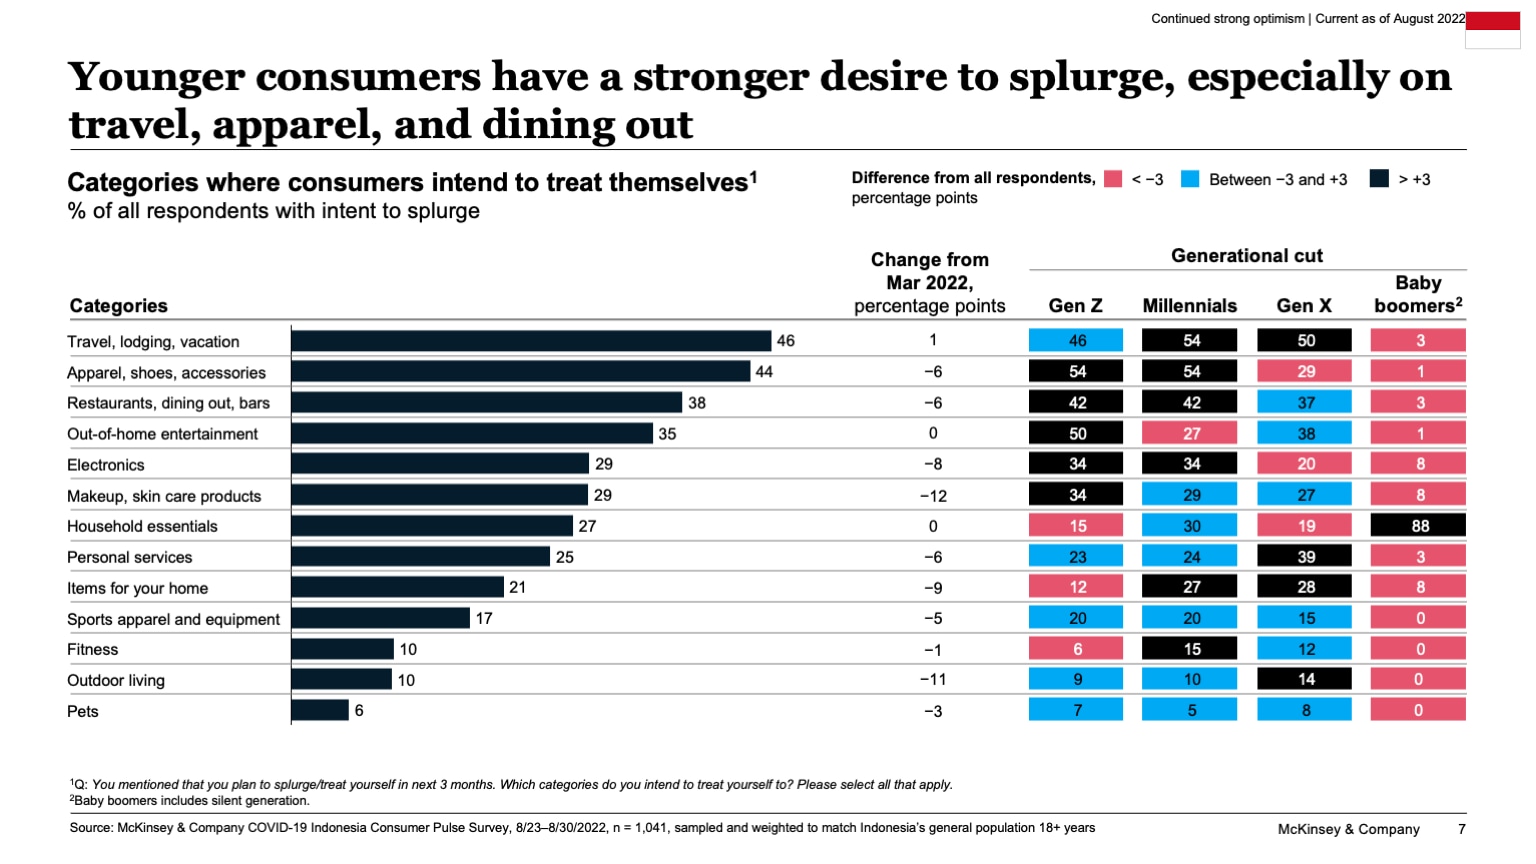 Younger consumers have a stronger desire to splurge, especially on travel, apparel, and dining out